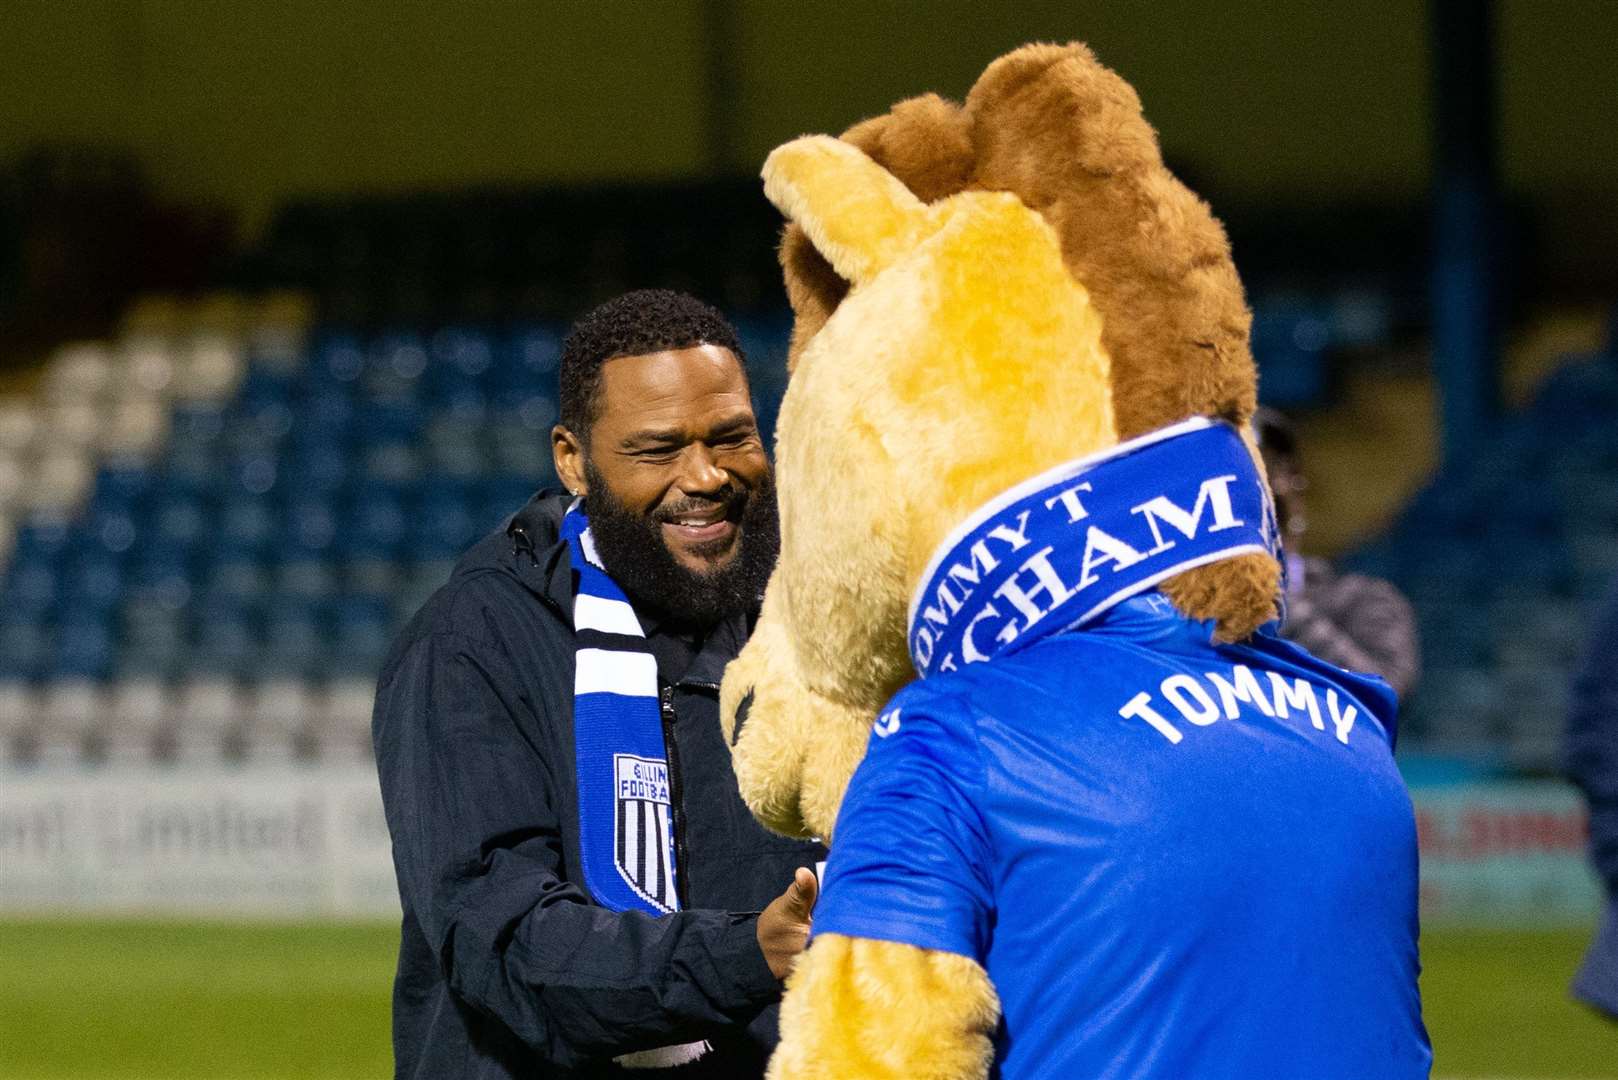 He even met mascot Tommy. Picture: Kent Pro Images